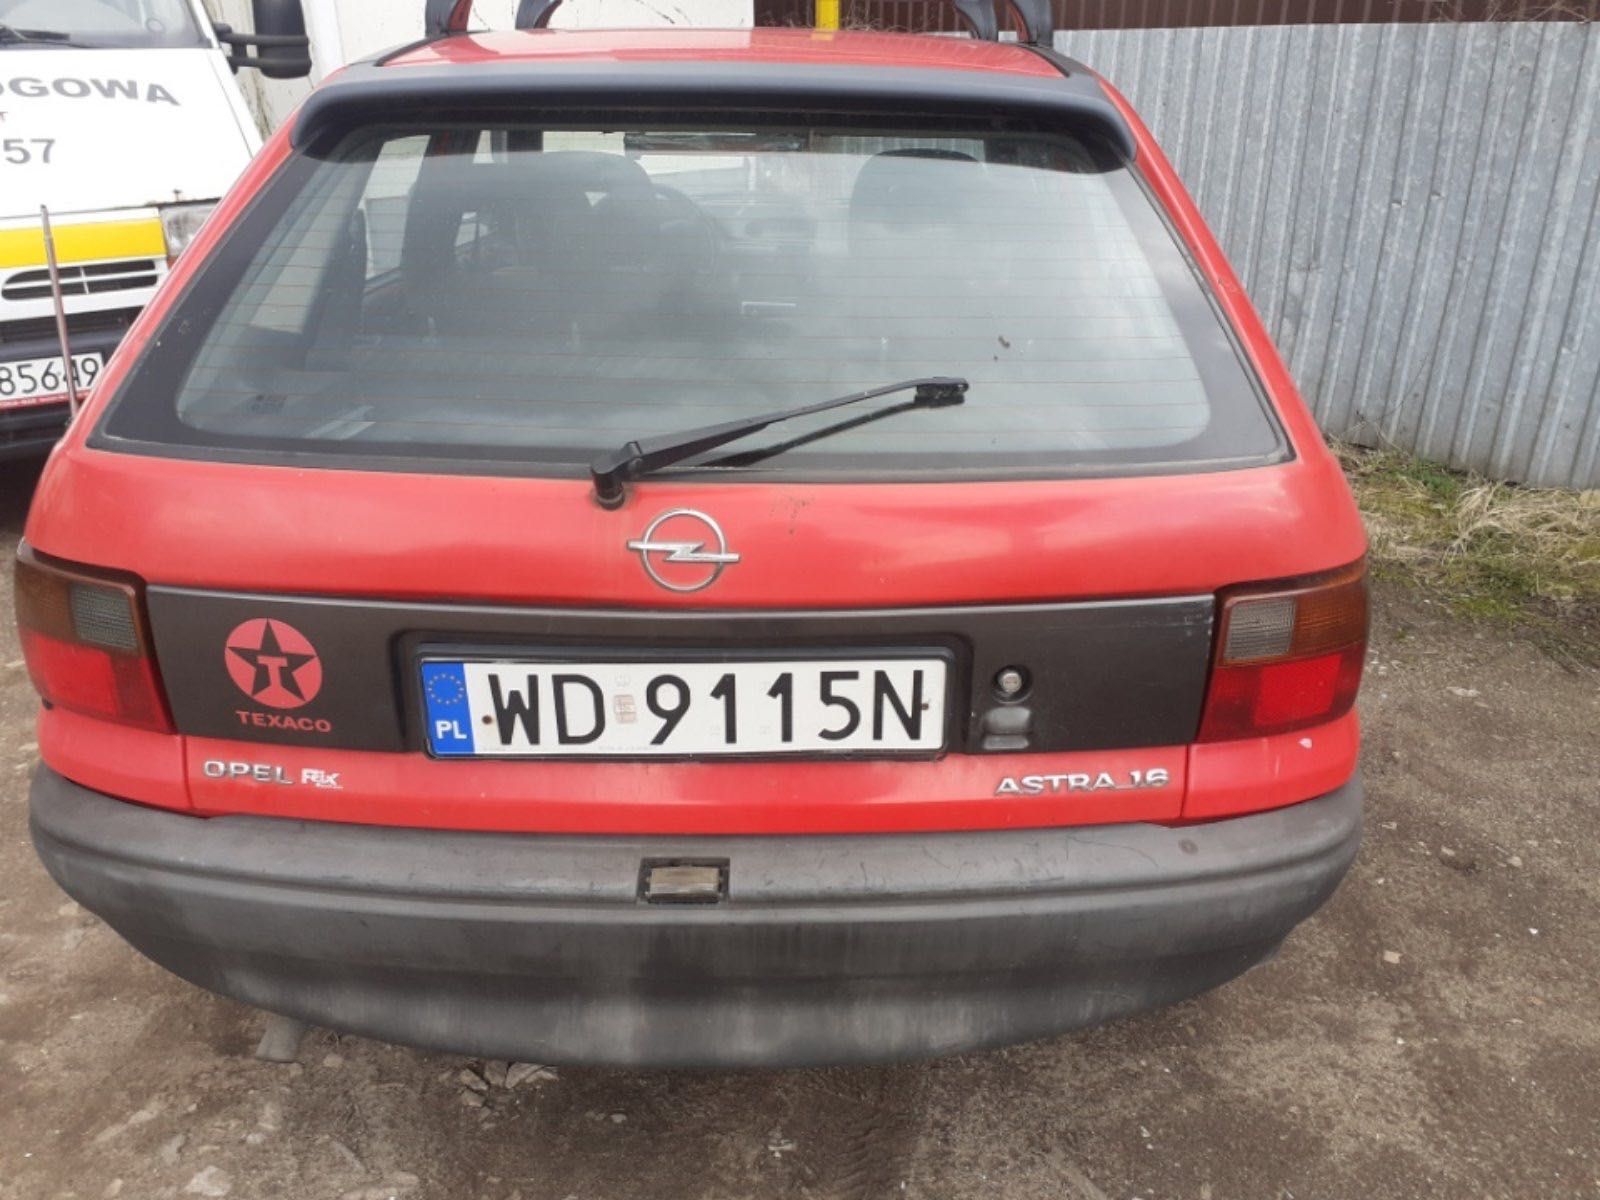 Opel astra 1.6benzyna 2000